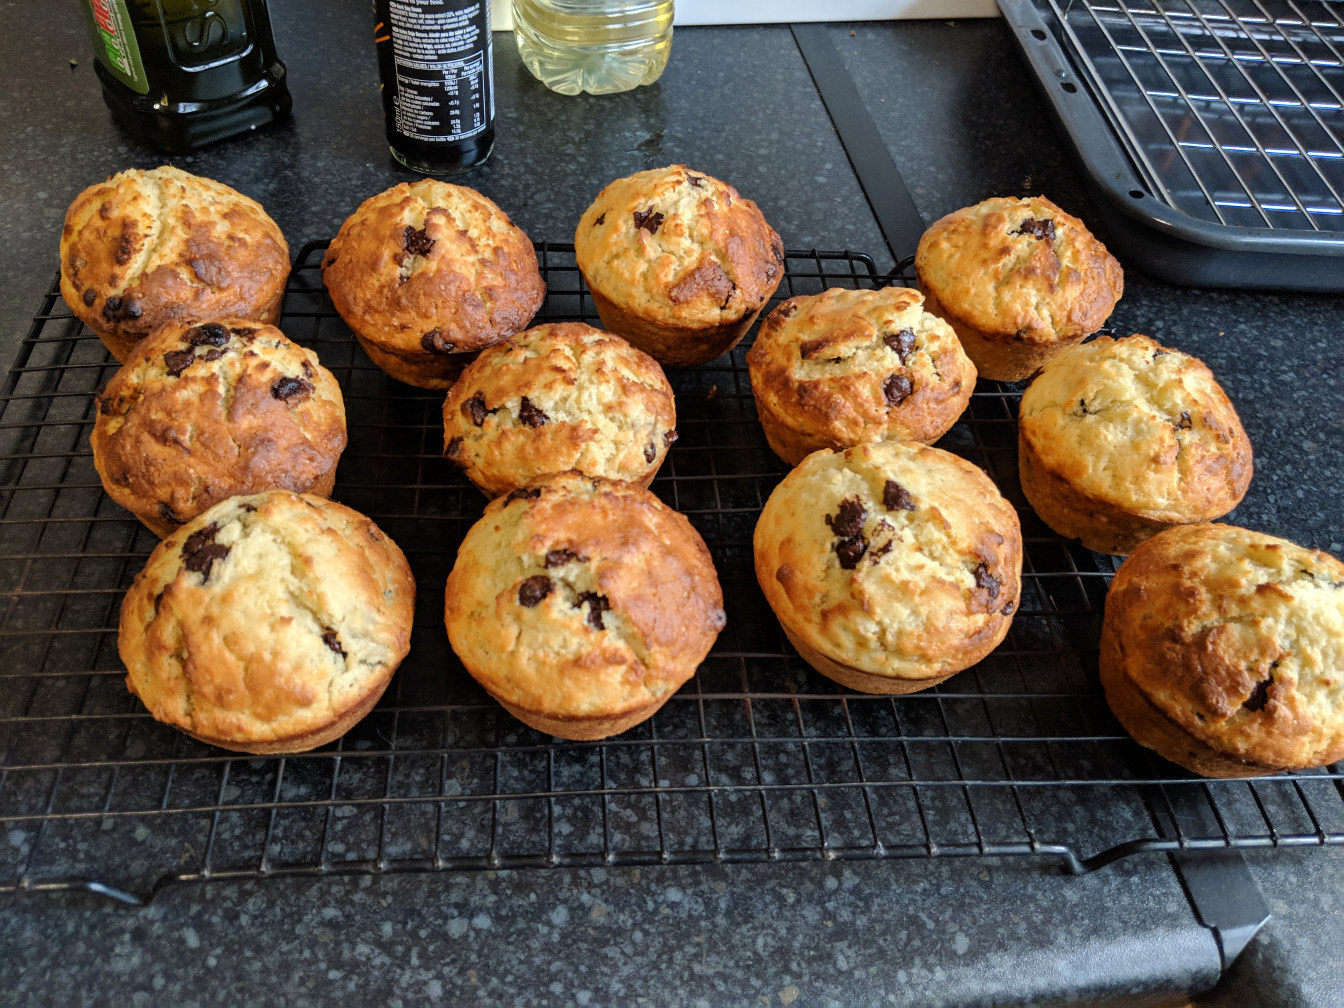 Banana chocolate chip muffins in a tray